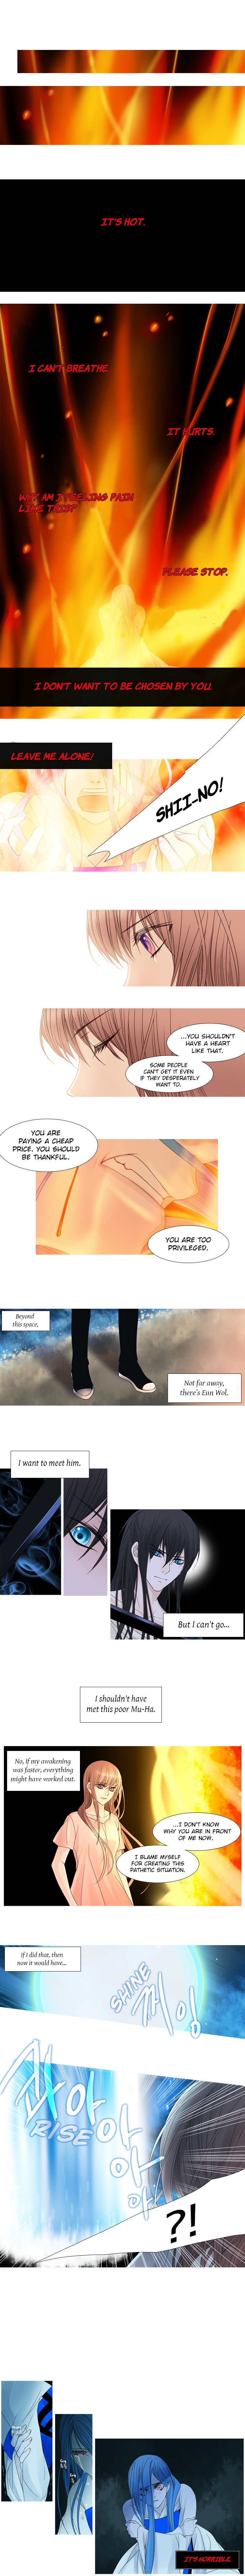 Heavenly Match - Page 1